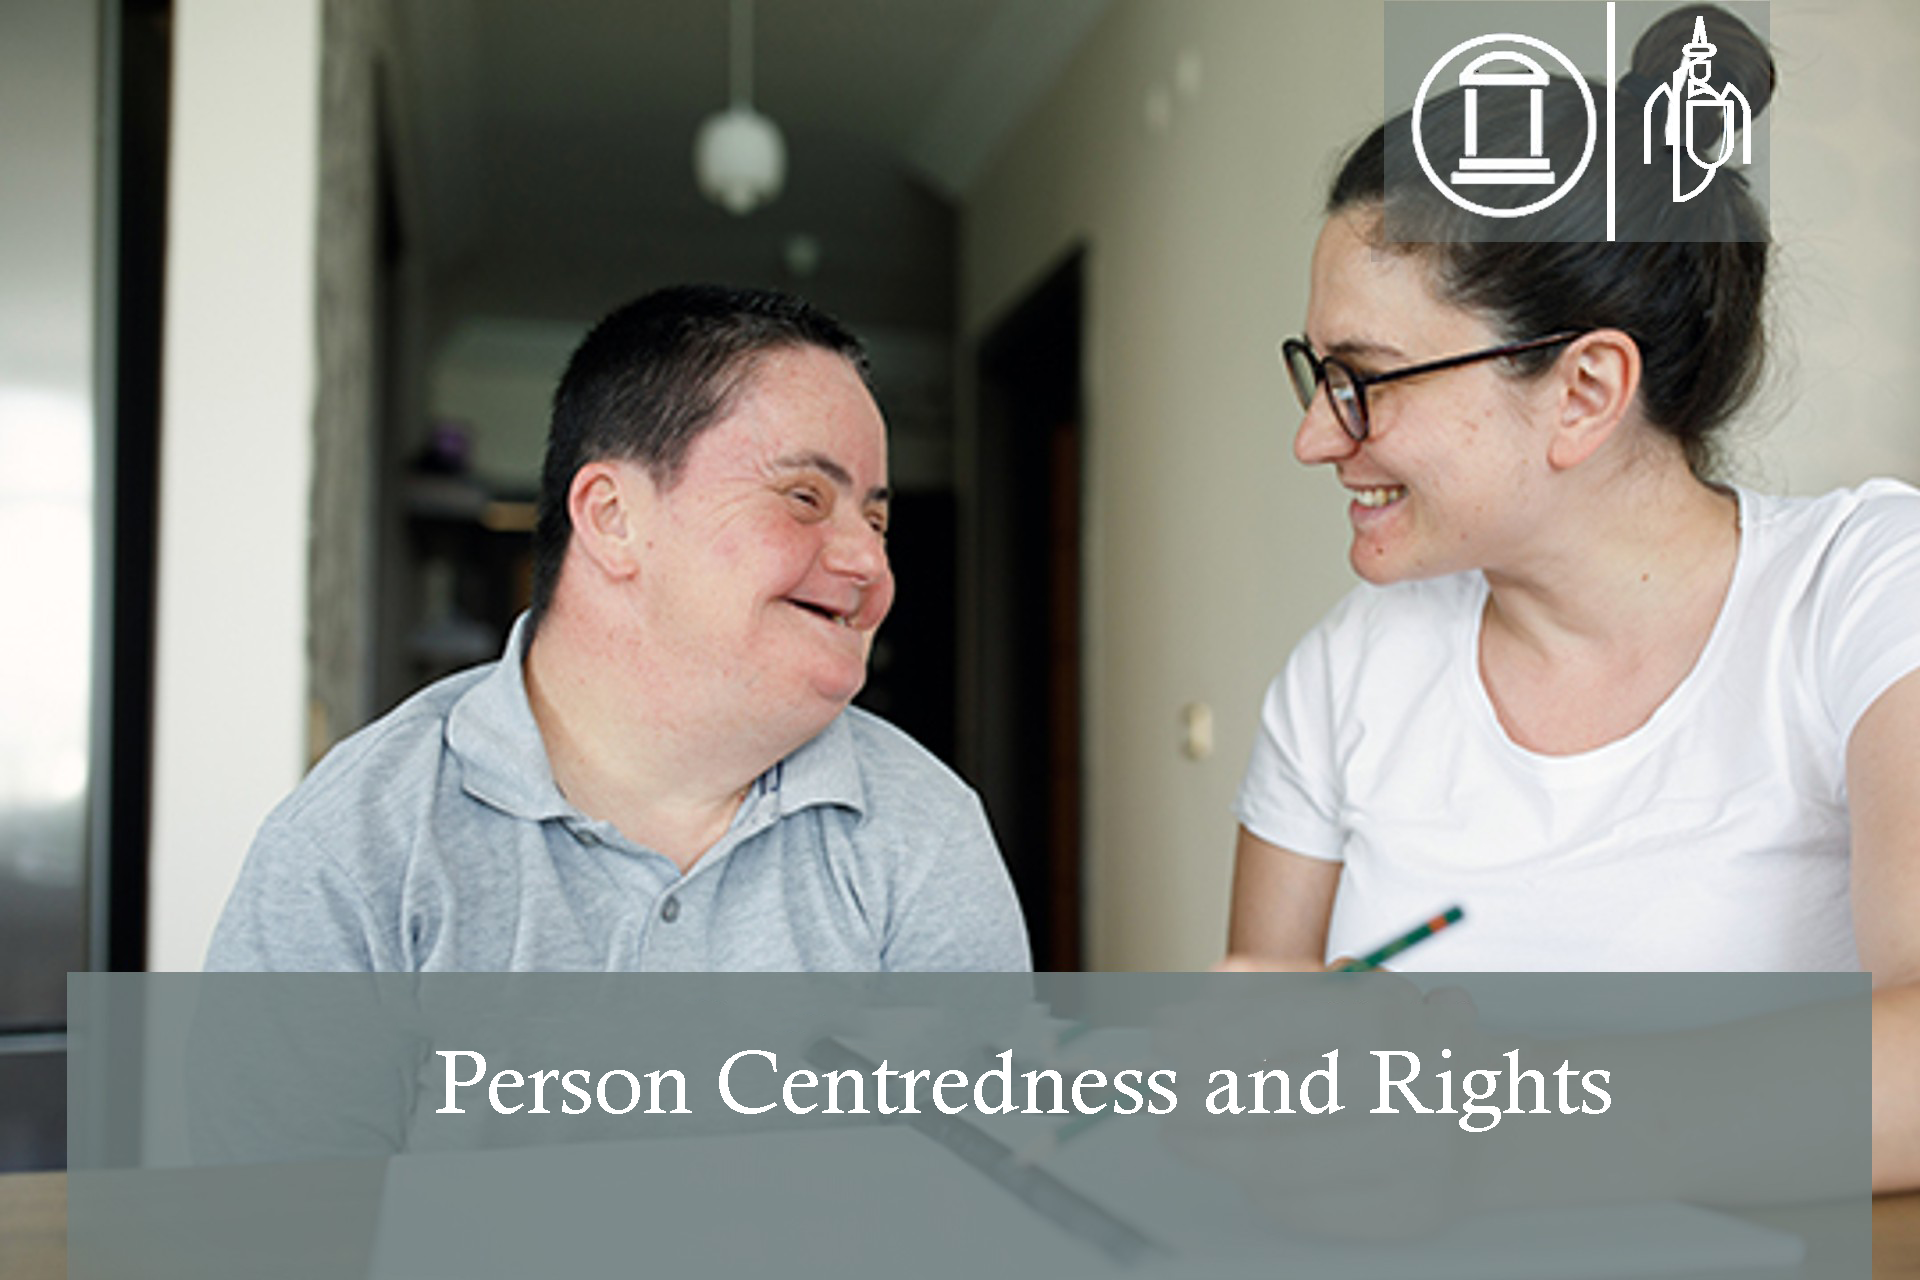 Person Centredness and Rights